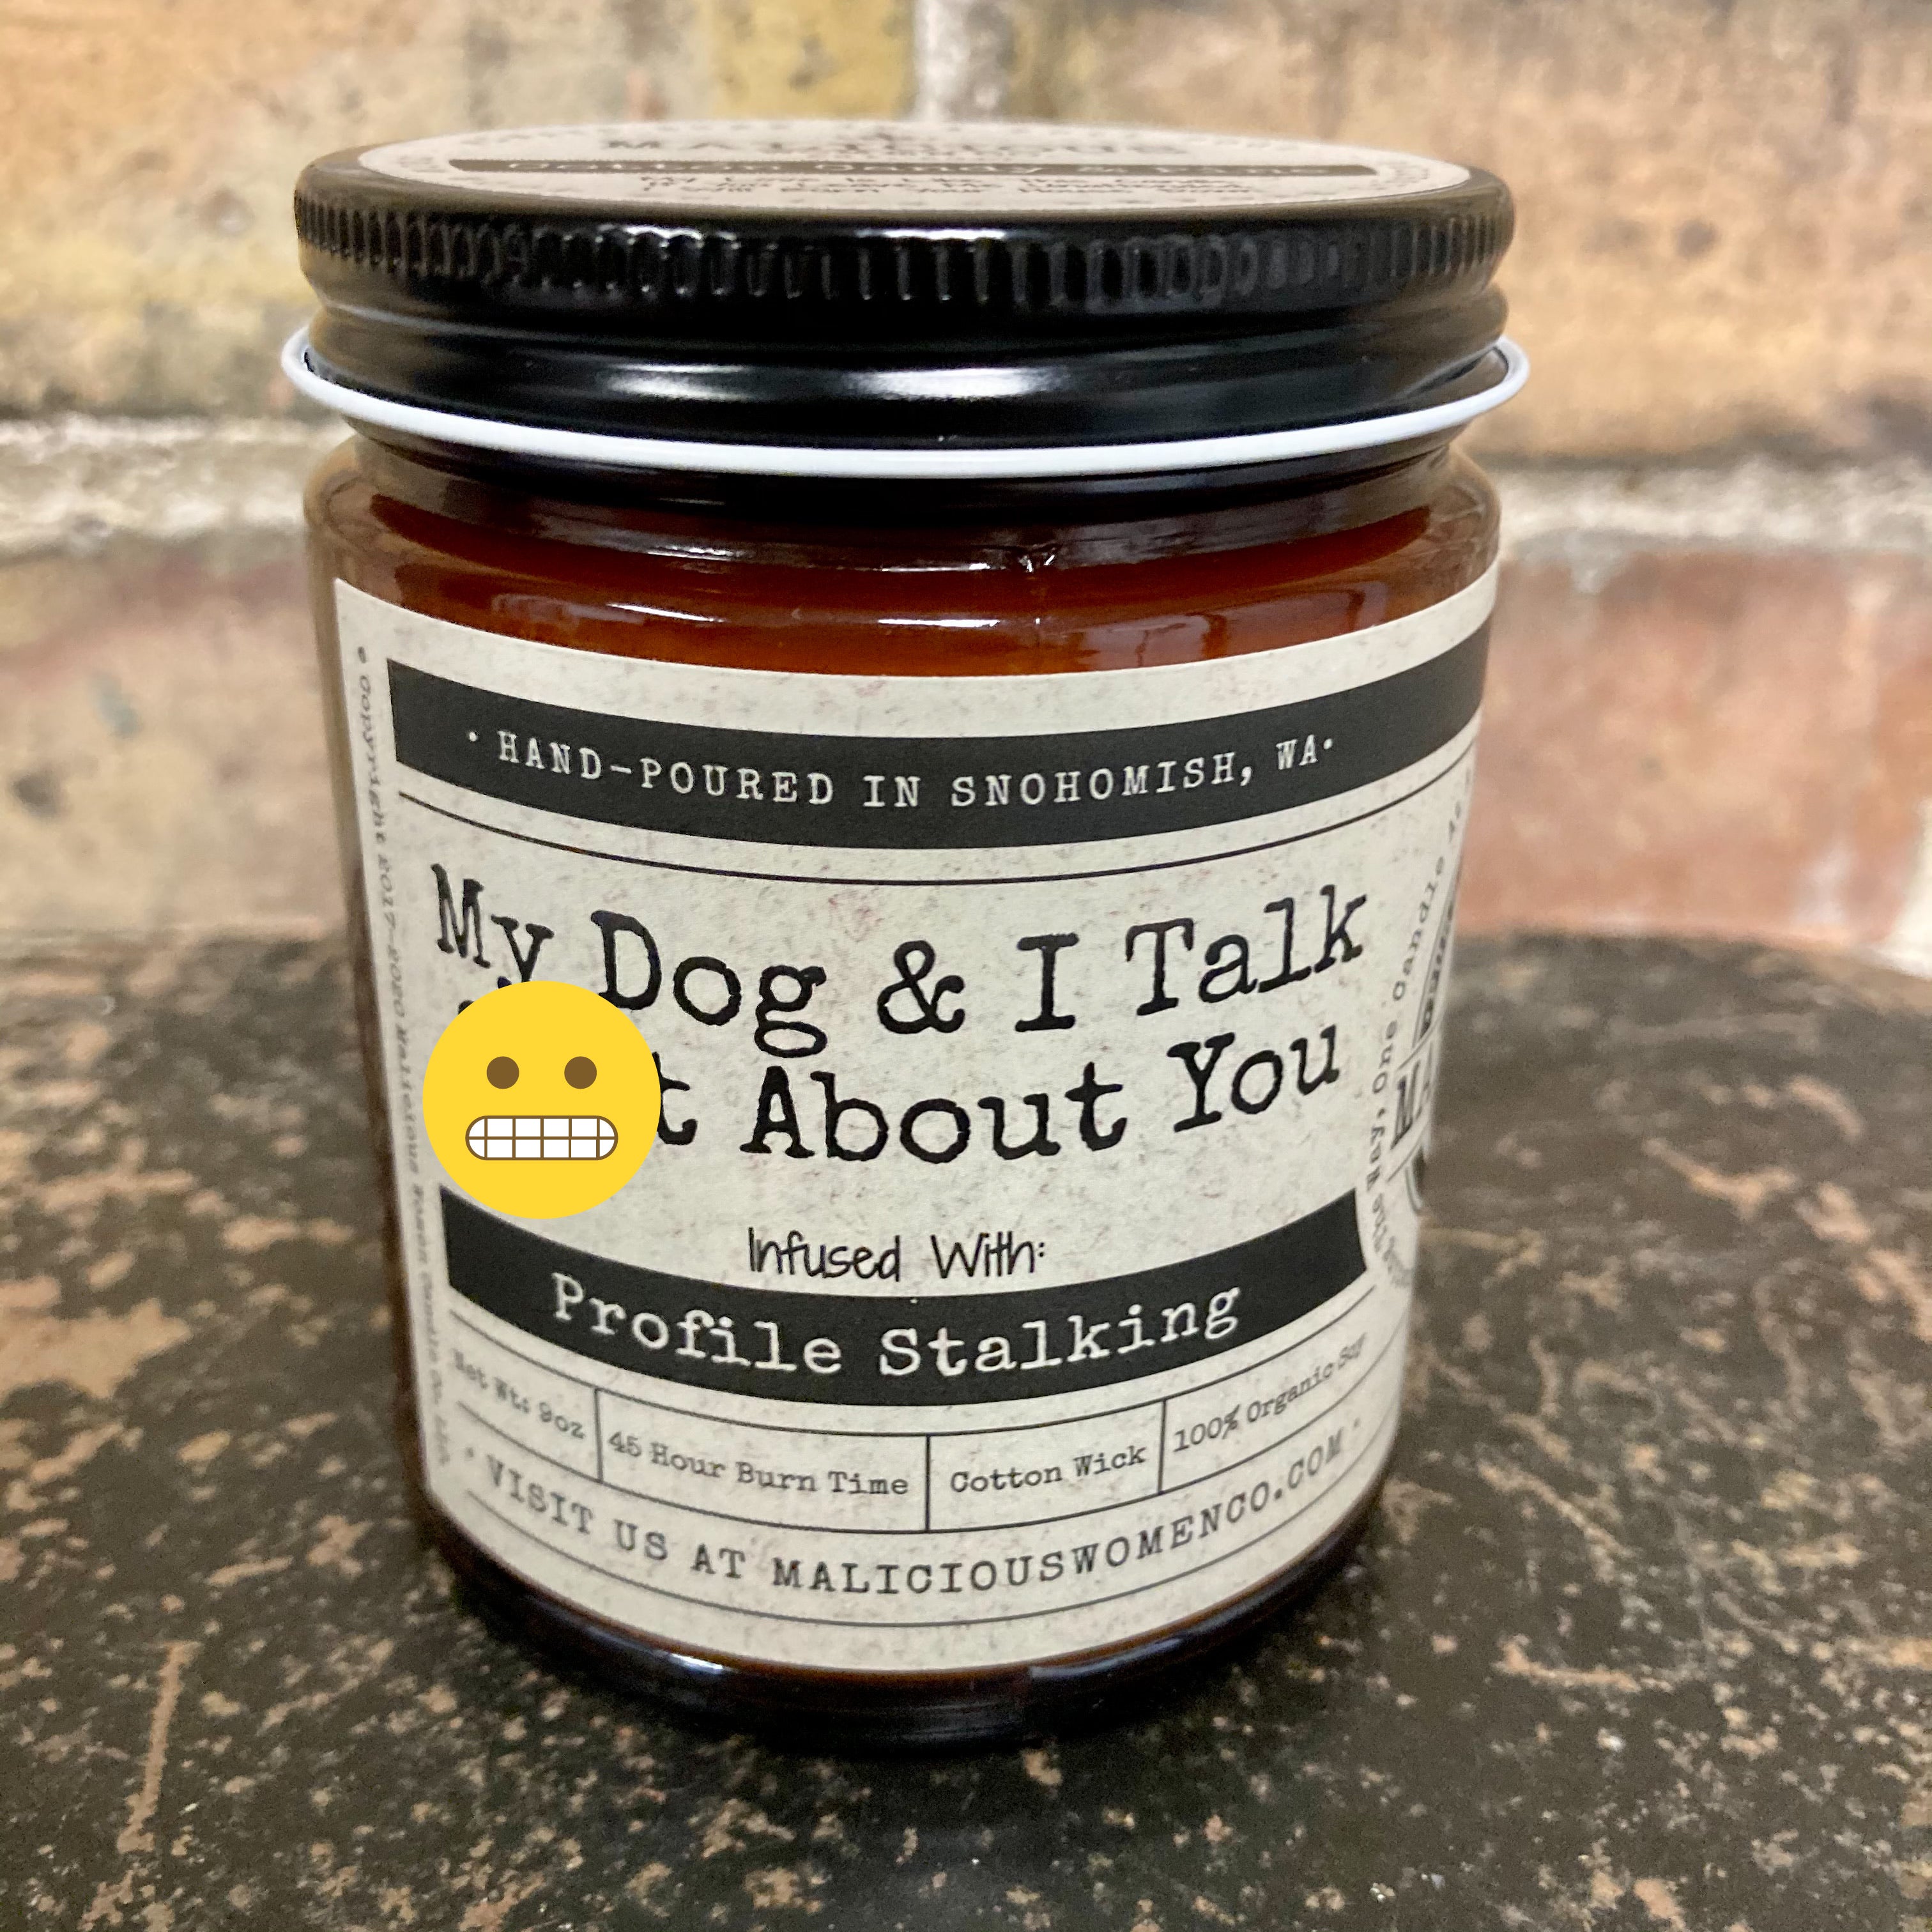 My Dog & I Talk Sh*t About You - Infused With "Profile Stalking" | Scent: Cotton Candy & Pine